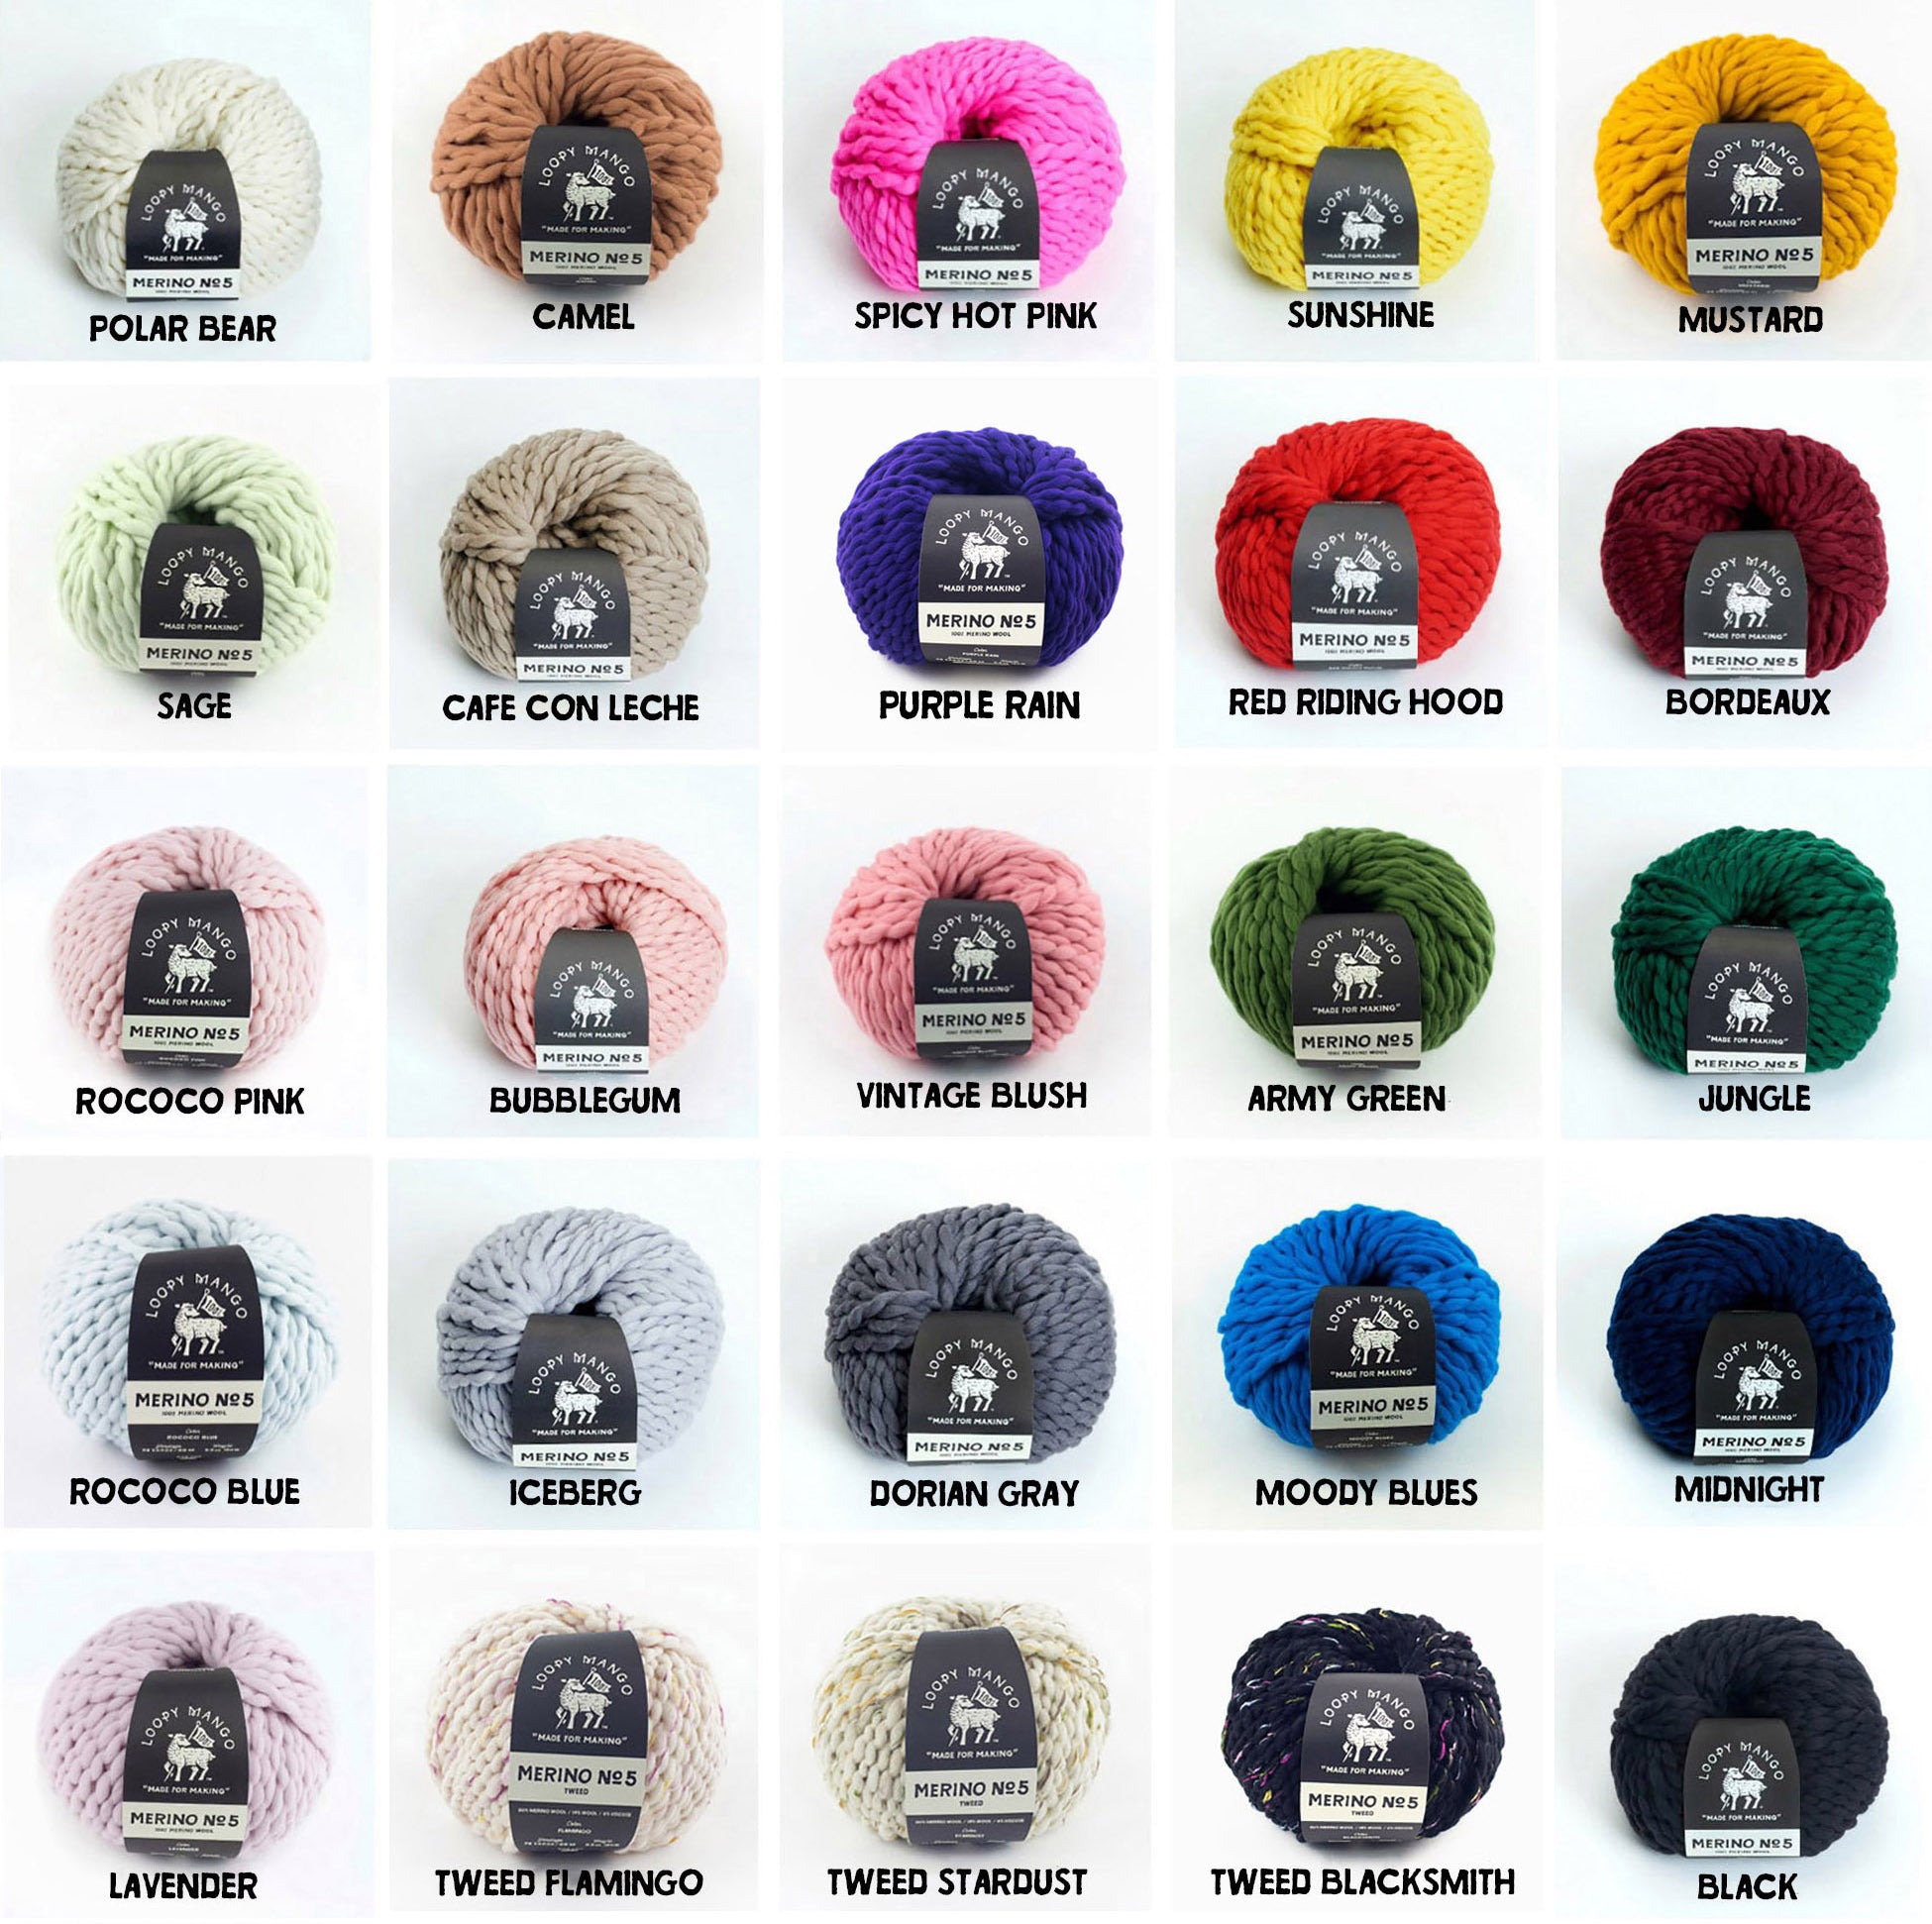 DIY Kit - Edelweiss Pompom Hat with 3 colors - Merino No. 5